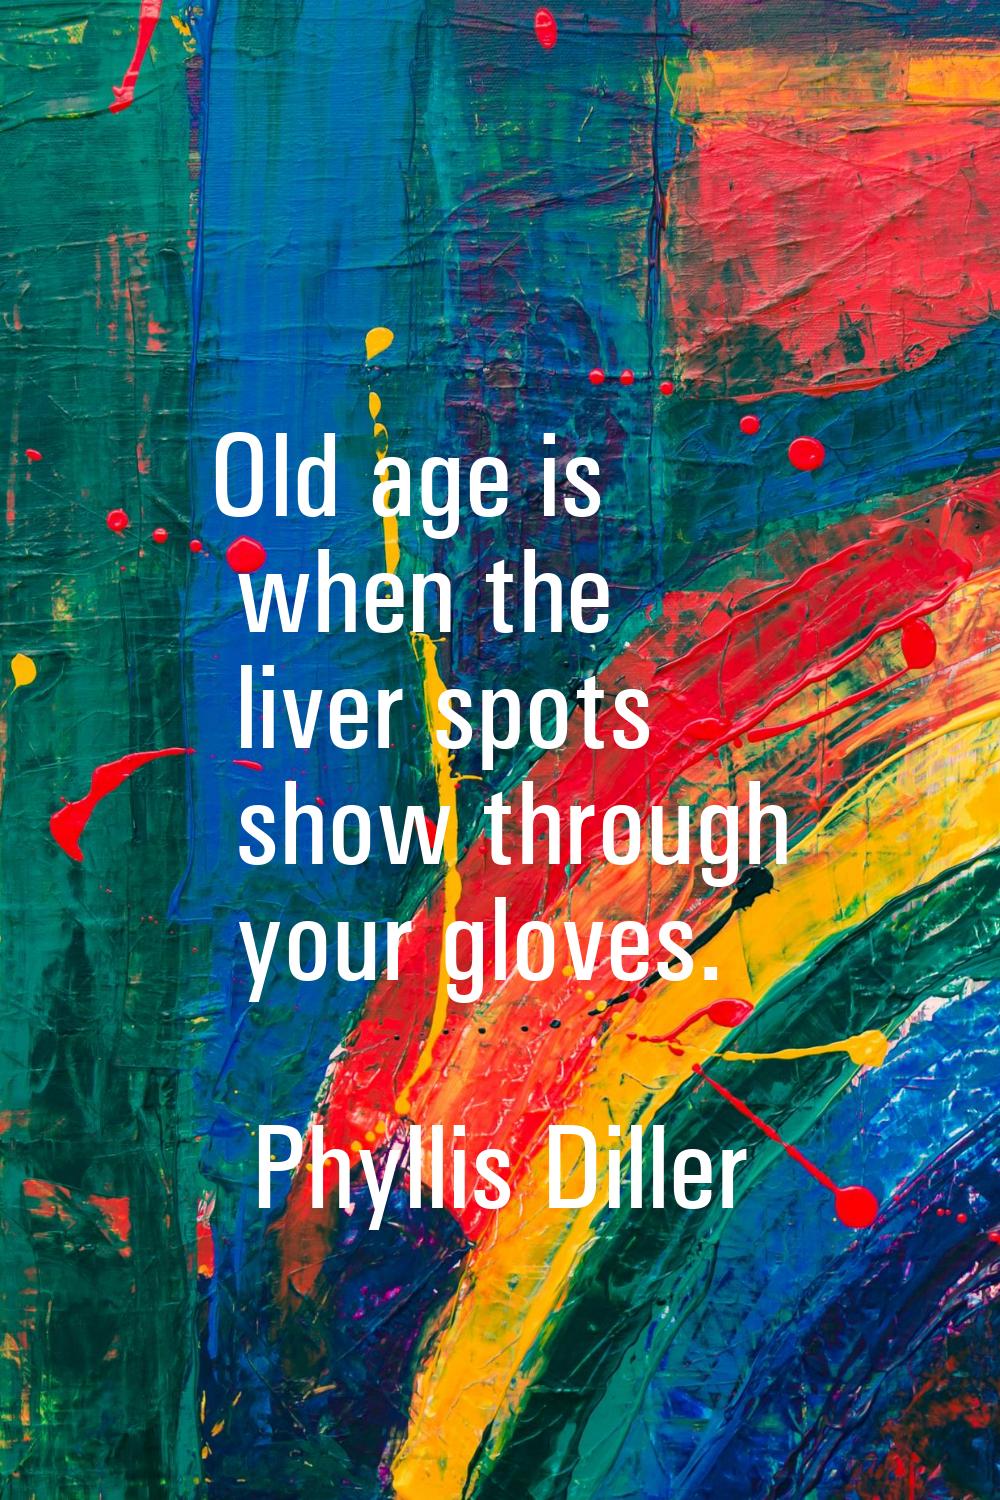 Old age is when the liver spots show through your gloves.